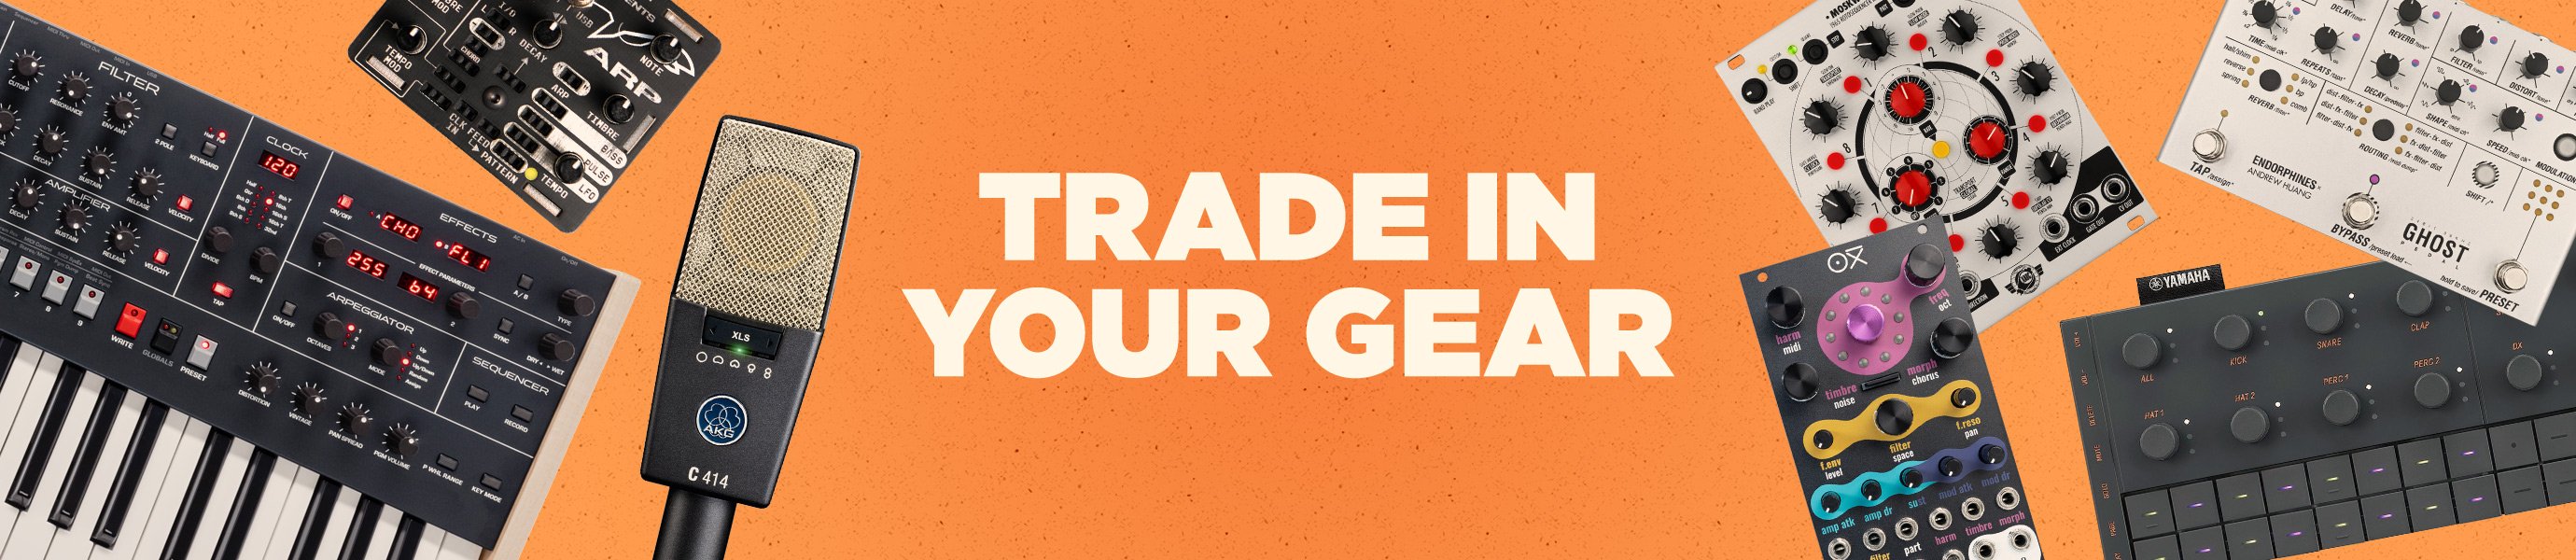 Trade In Your Gear